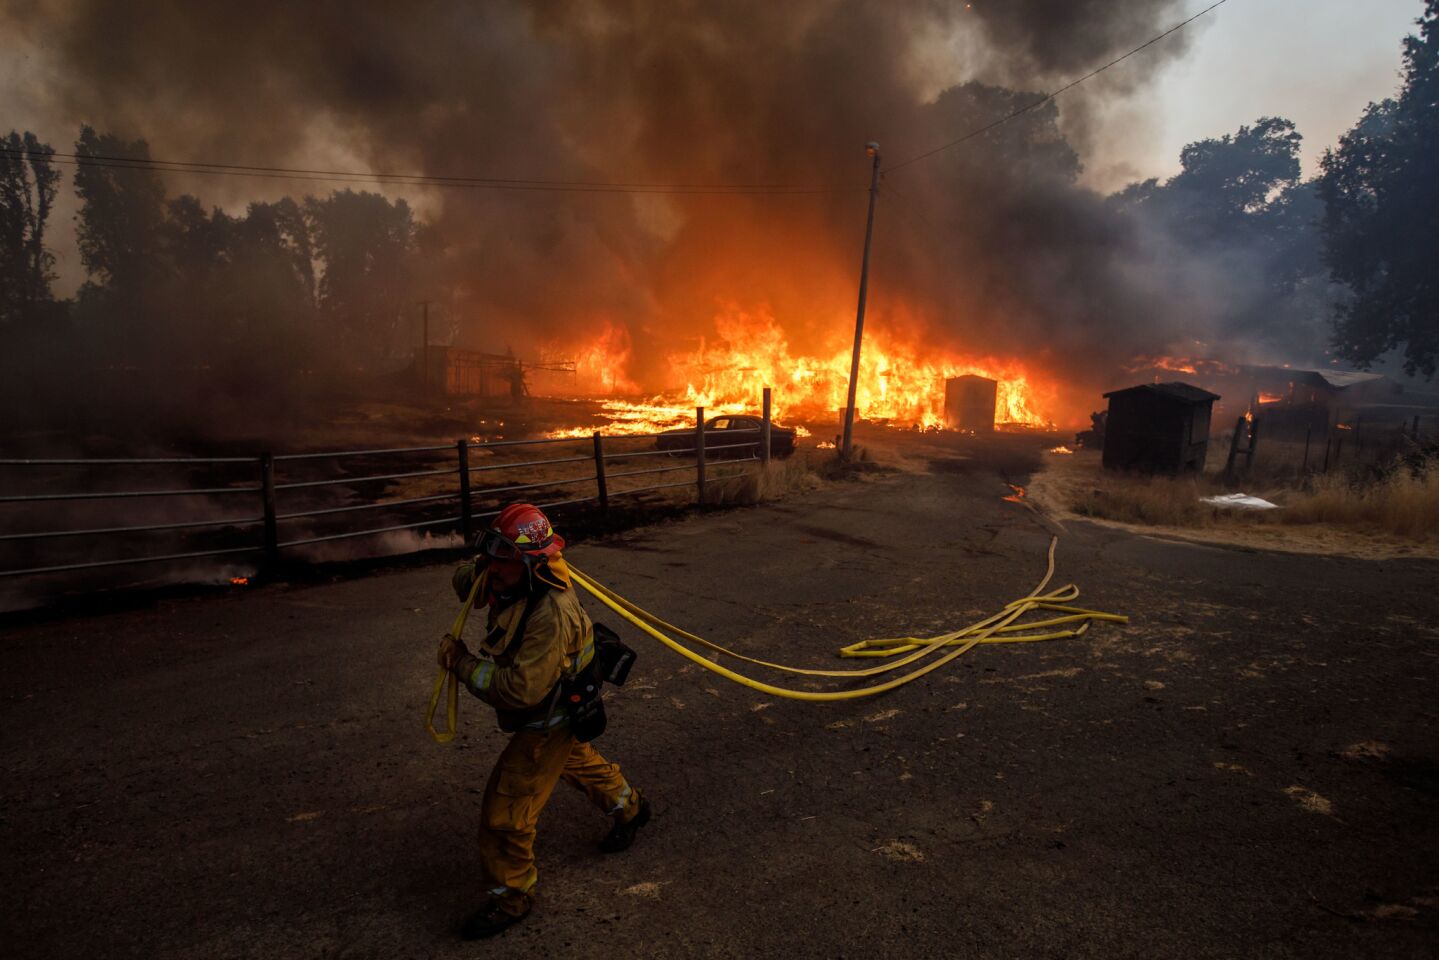 A West Covina firefighter works as a barn in the background is destroyed by the Mendocino complex fires near Lakeport, Calif., on July 31.